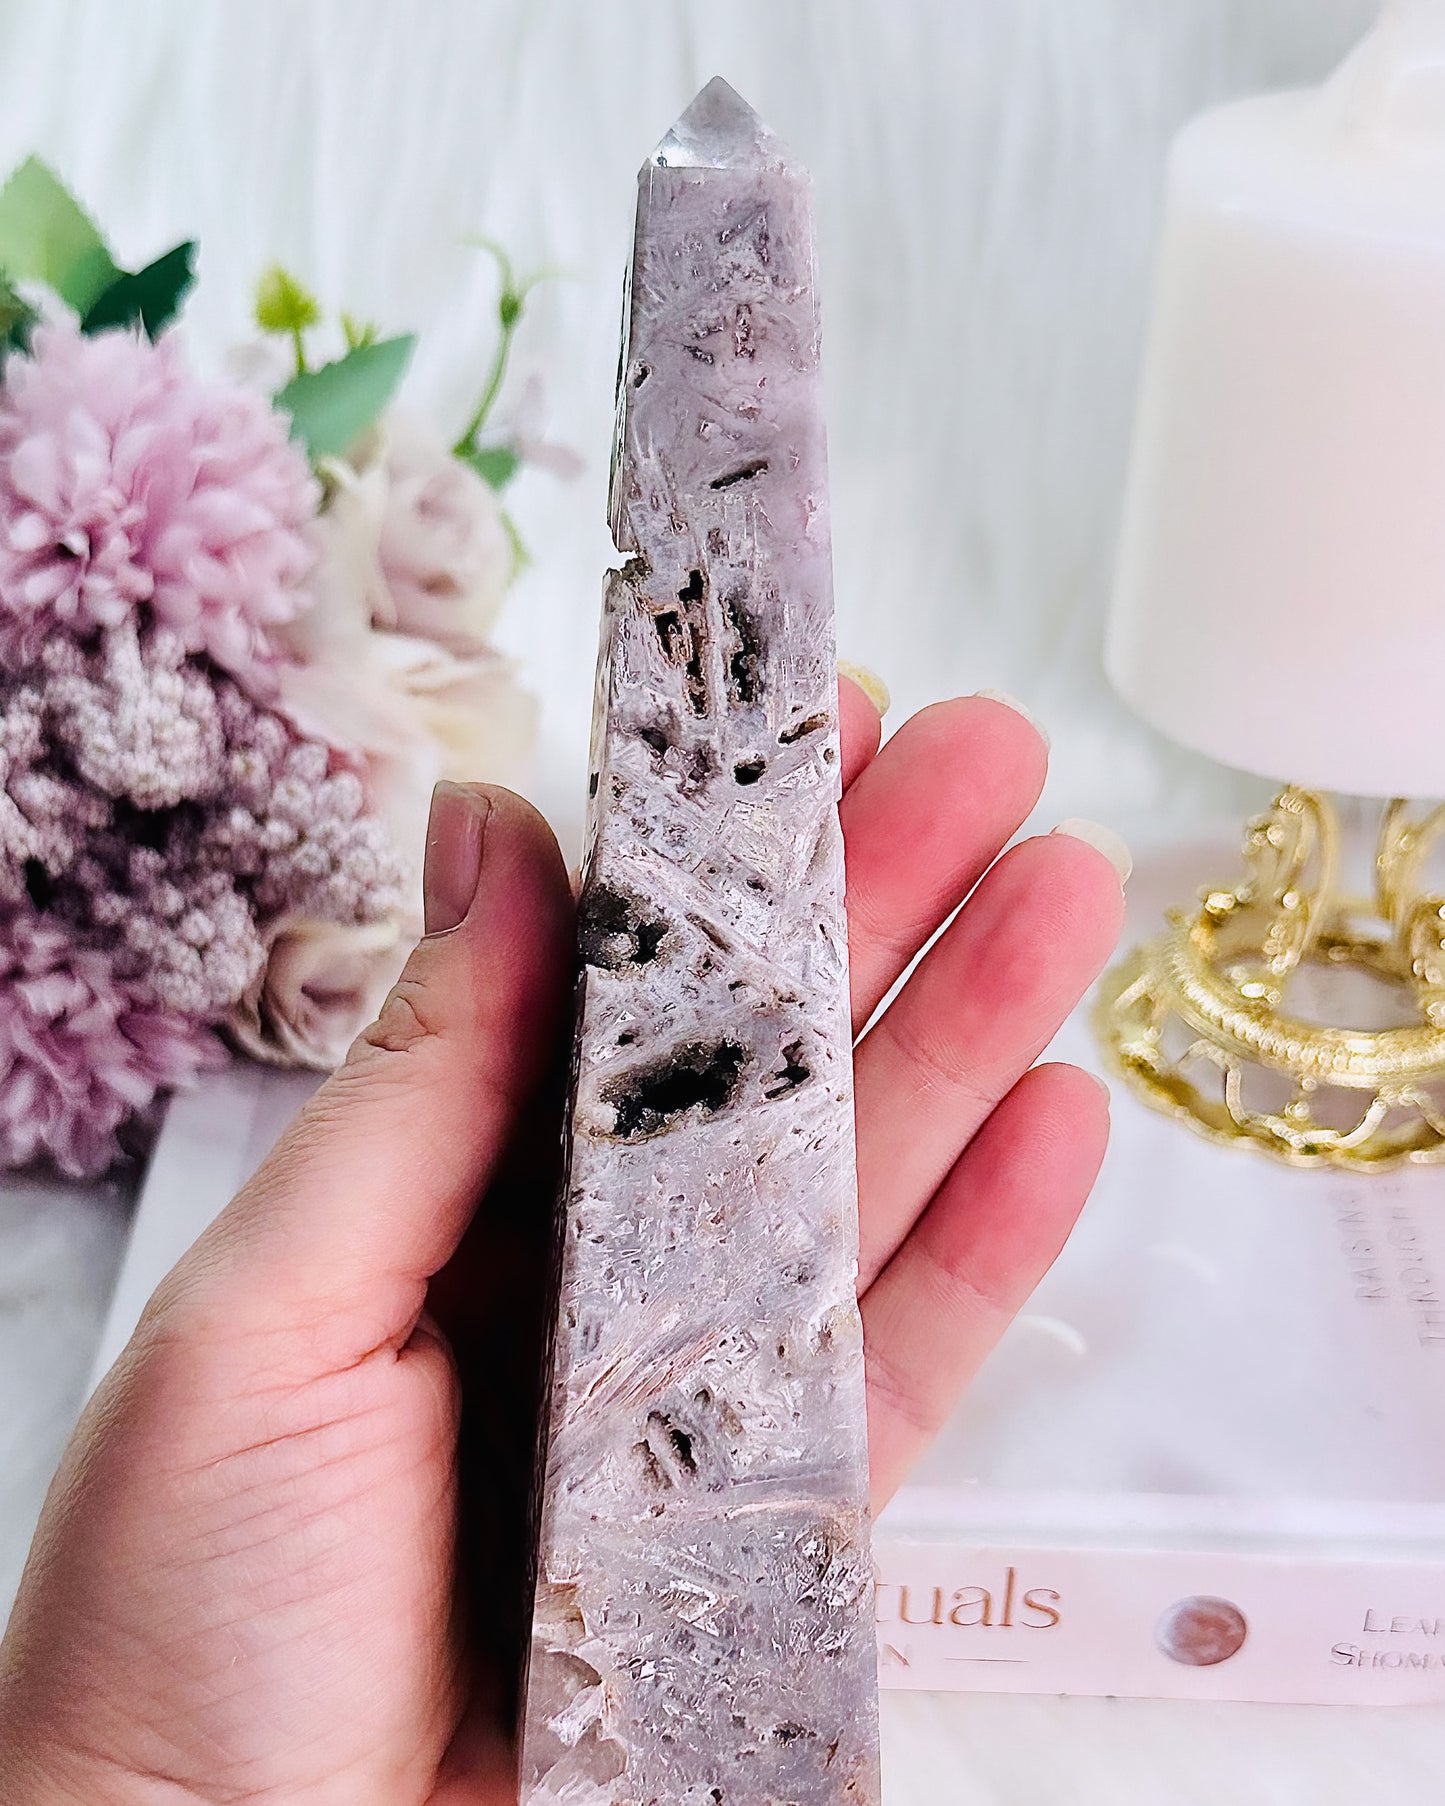 Absolutely Gorgeous Pink Amethyst Druzy Tower | Obelisk 17cm Tall with Rutile Formations From Brazil